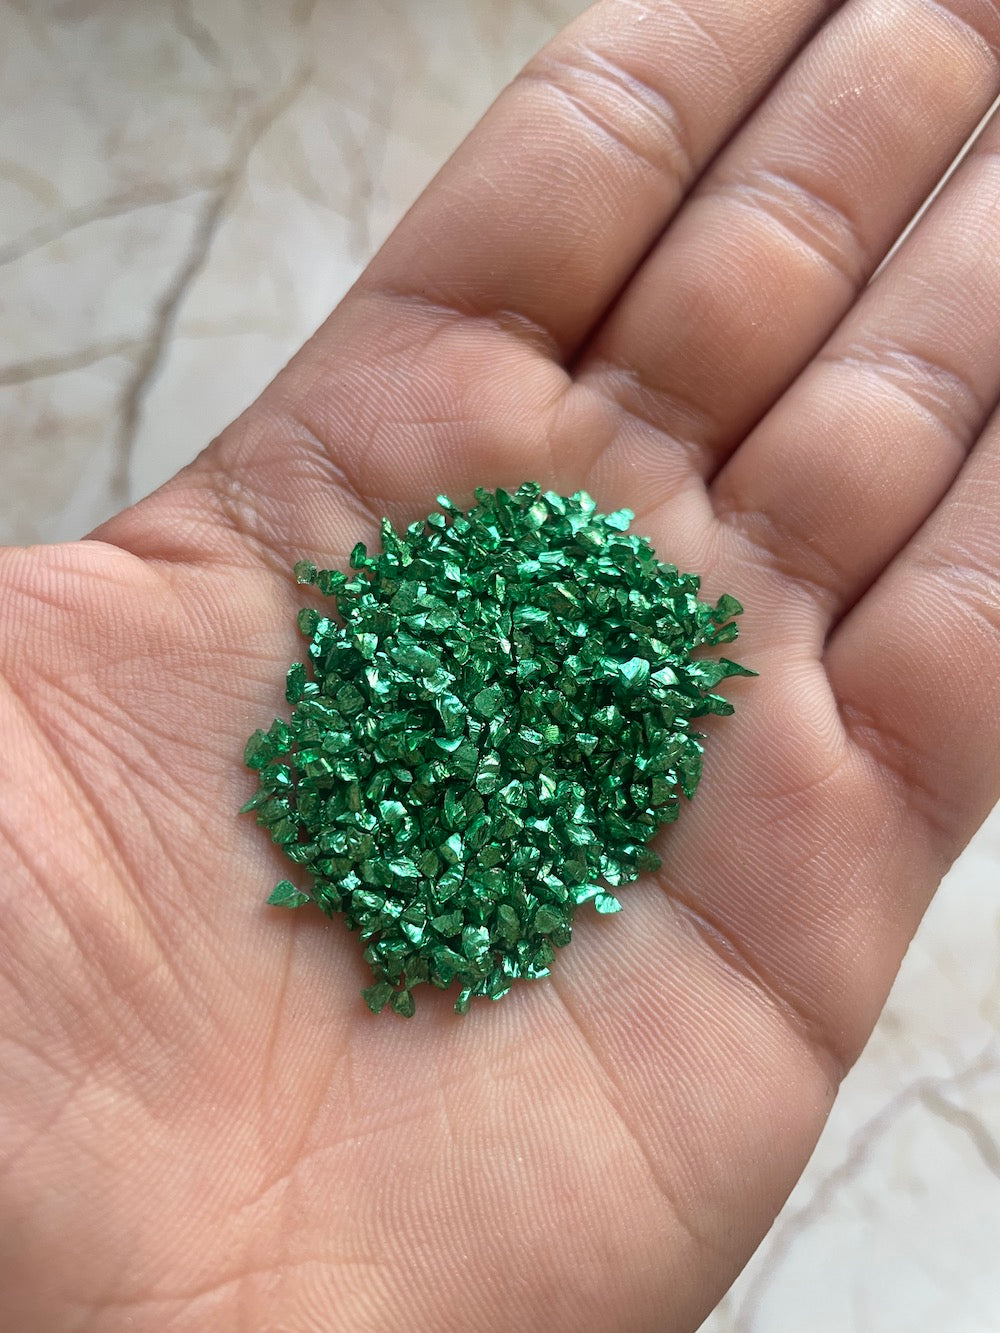 Electroplated granules